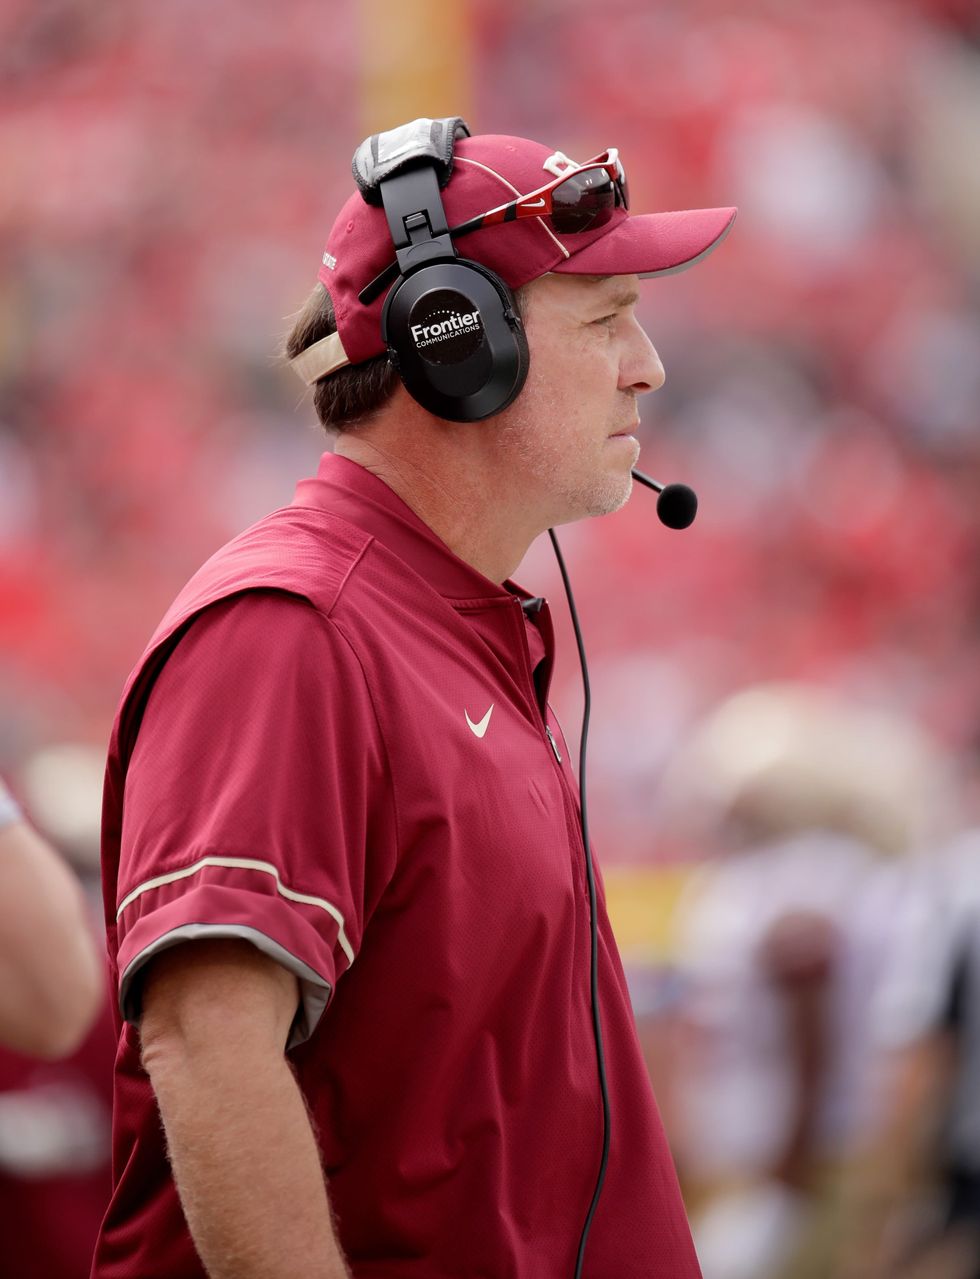 John Granato: Aggies pay steep price for Jimbo Fisher, and he is saying all the right things. Will it pay off?